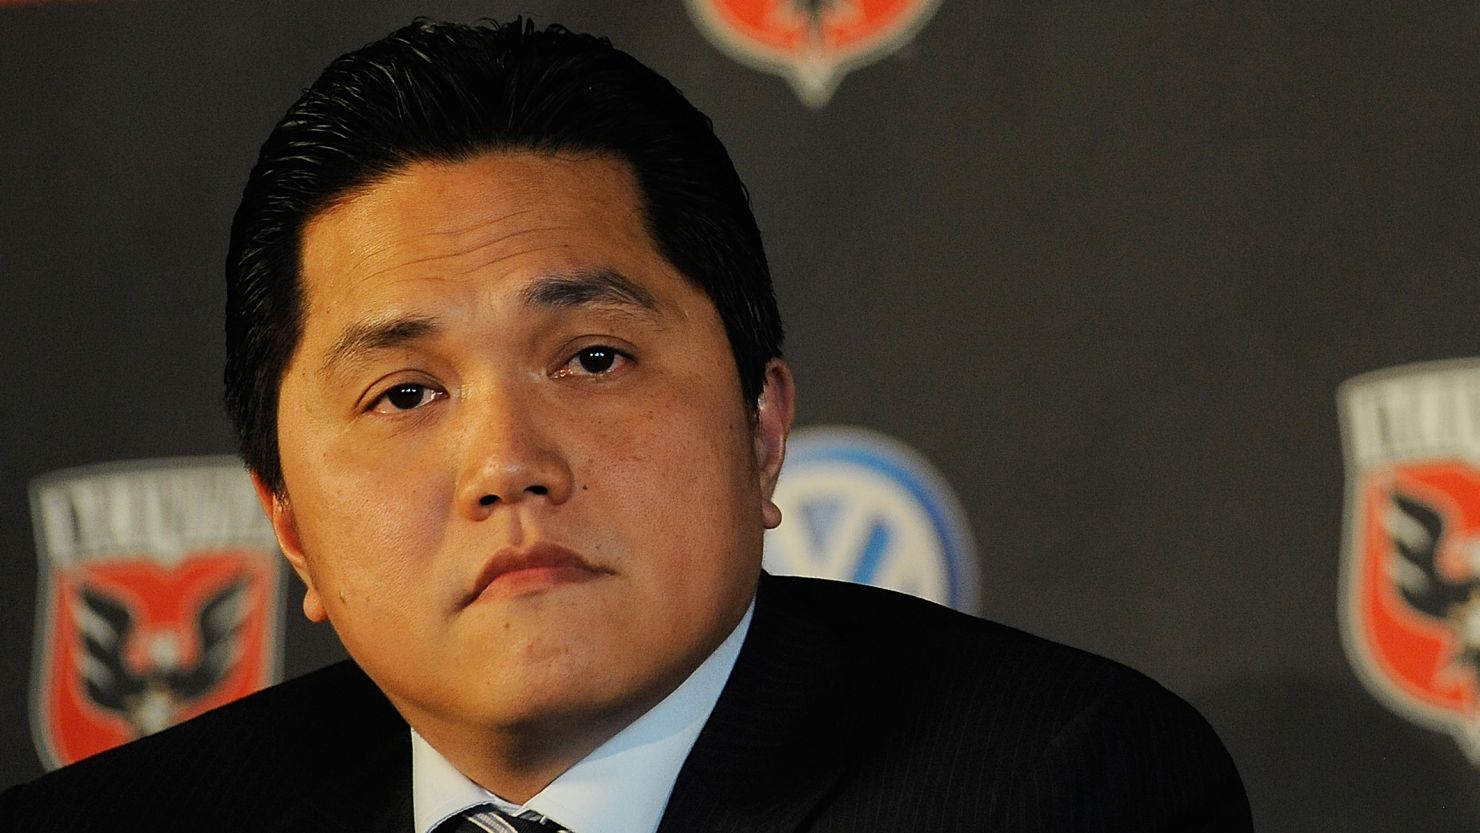 Indonesian Erick Thohir, who is also a part owner of MLS club DC United, has completed a takeover at Inter.